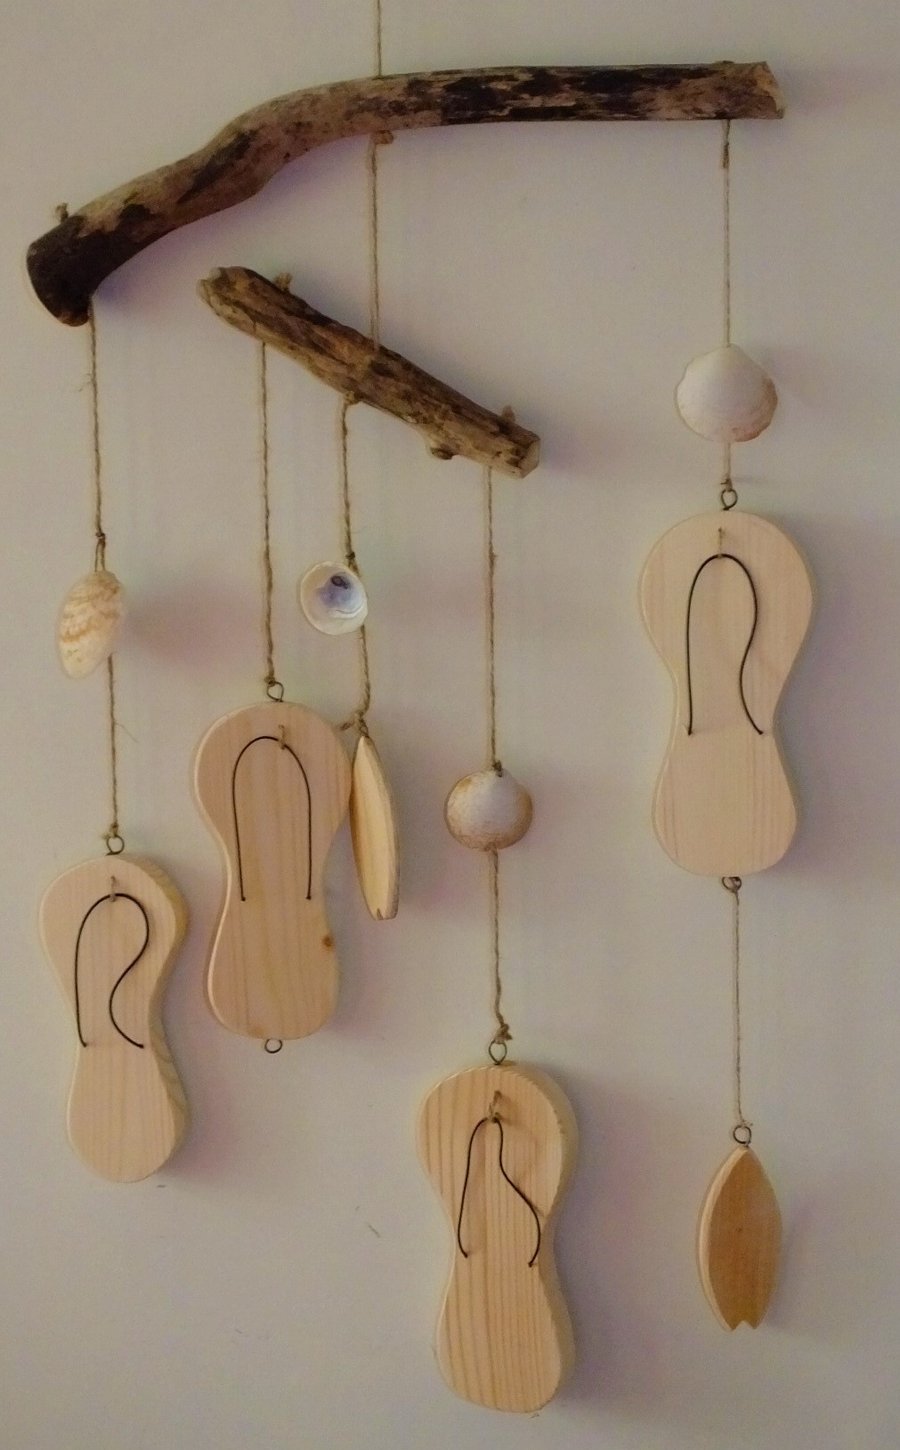 Driftwood mobile with flip flops, sea shells and surf boards ideal for summer.